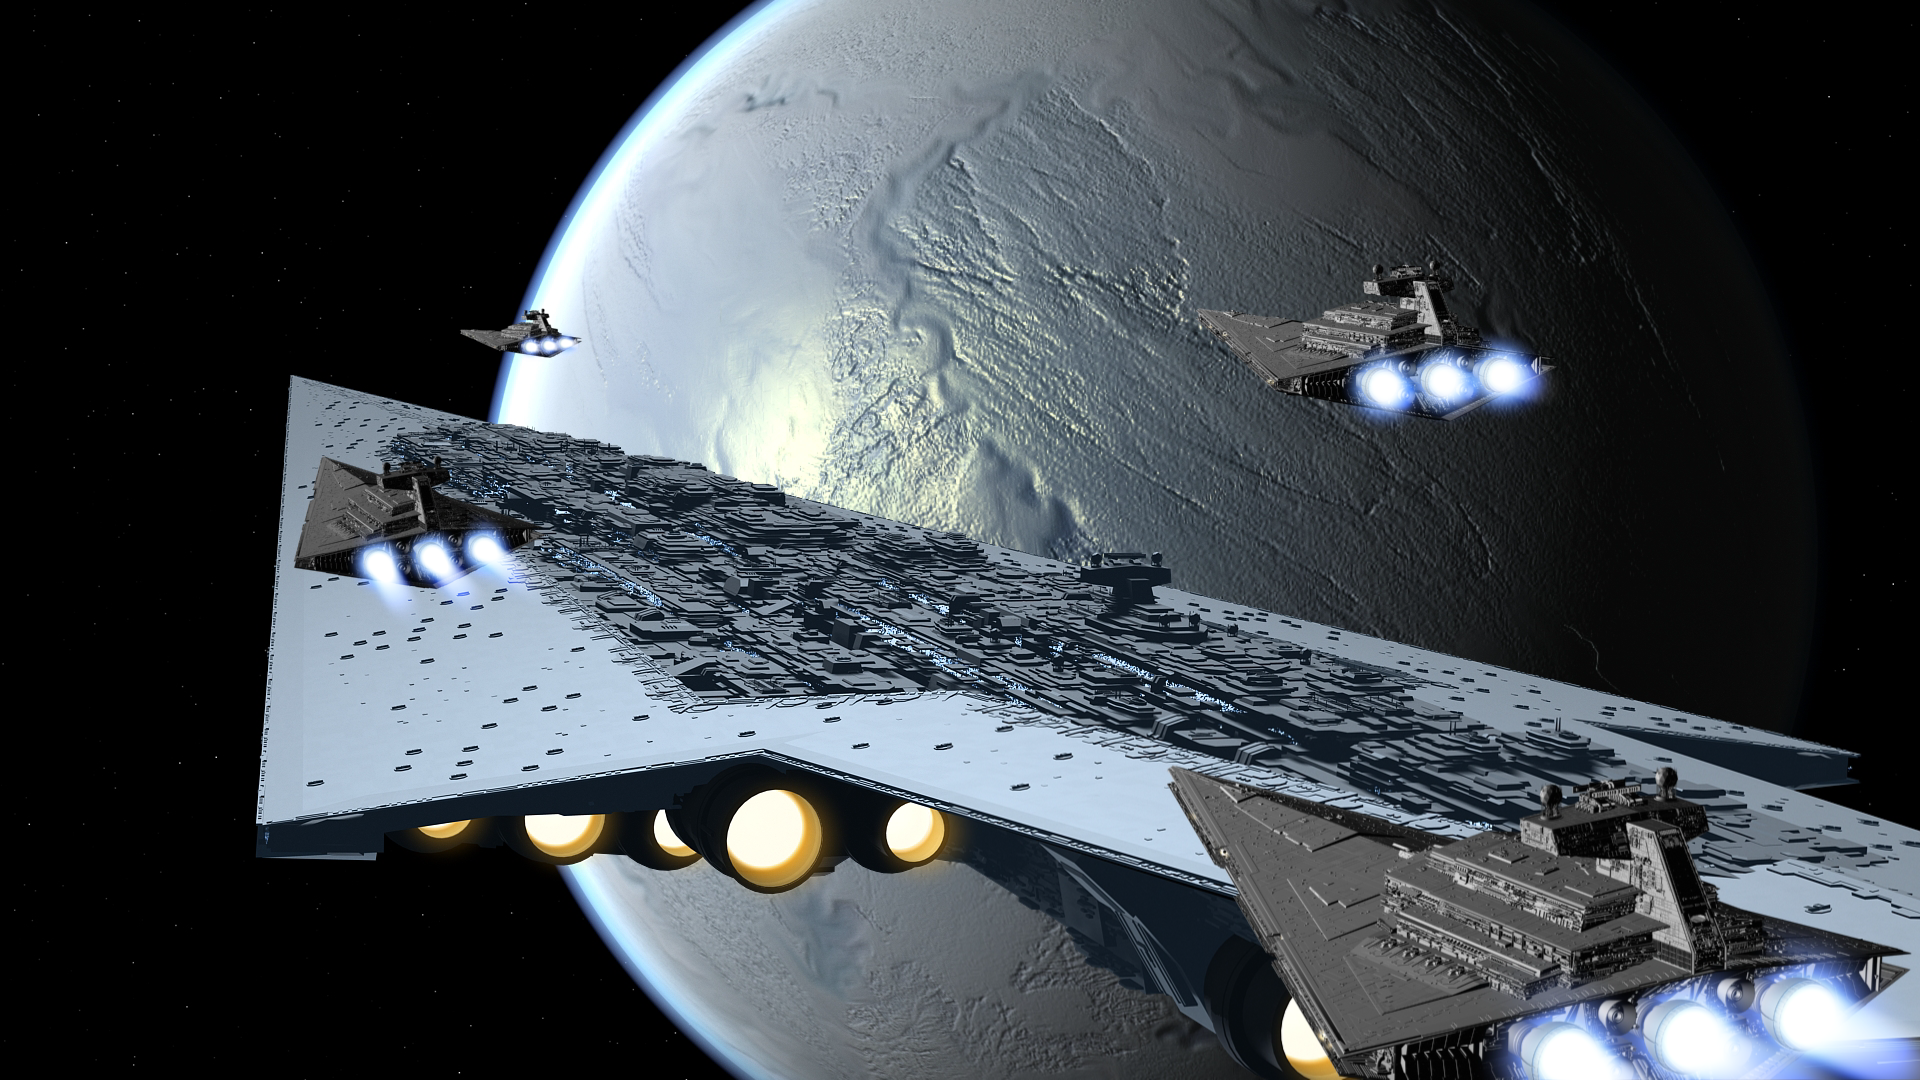 star wars wallpaper 1920x1080,outer space,astronomical object,spacecraft,space,space station